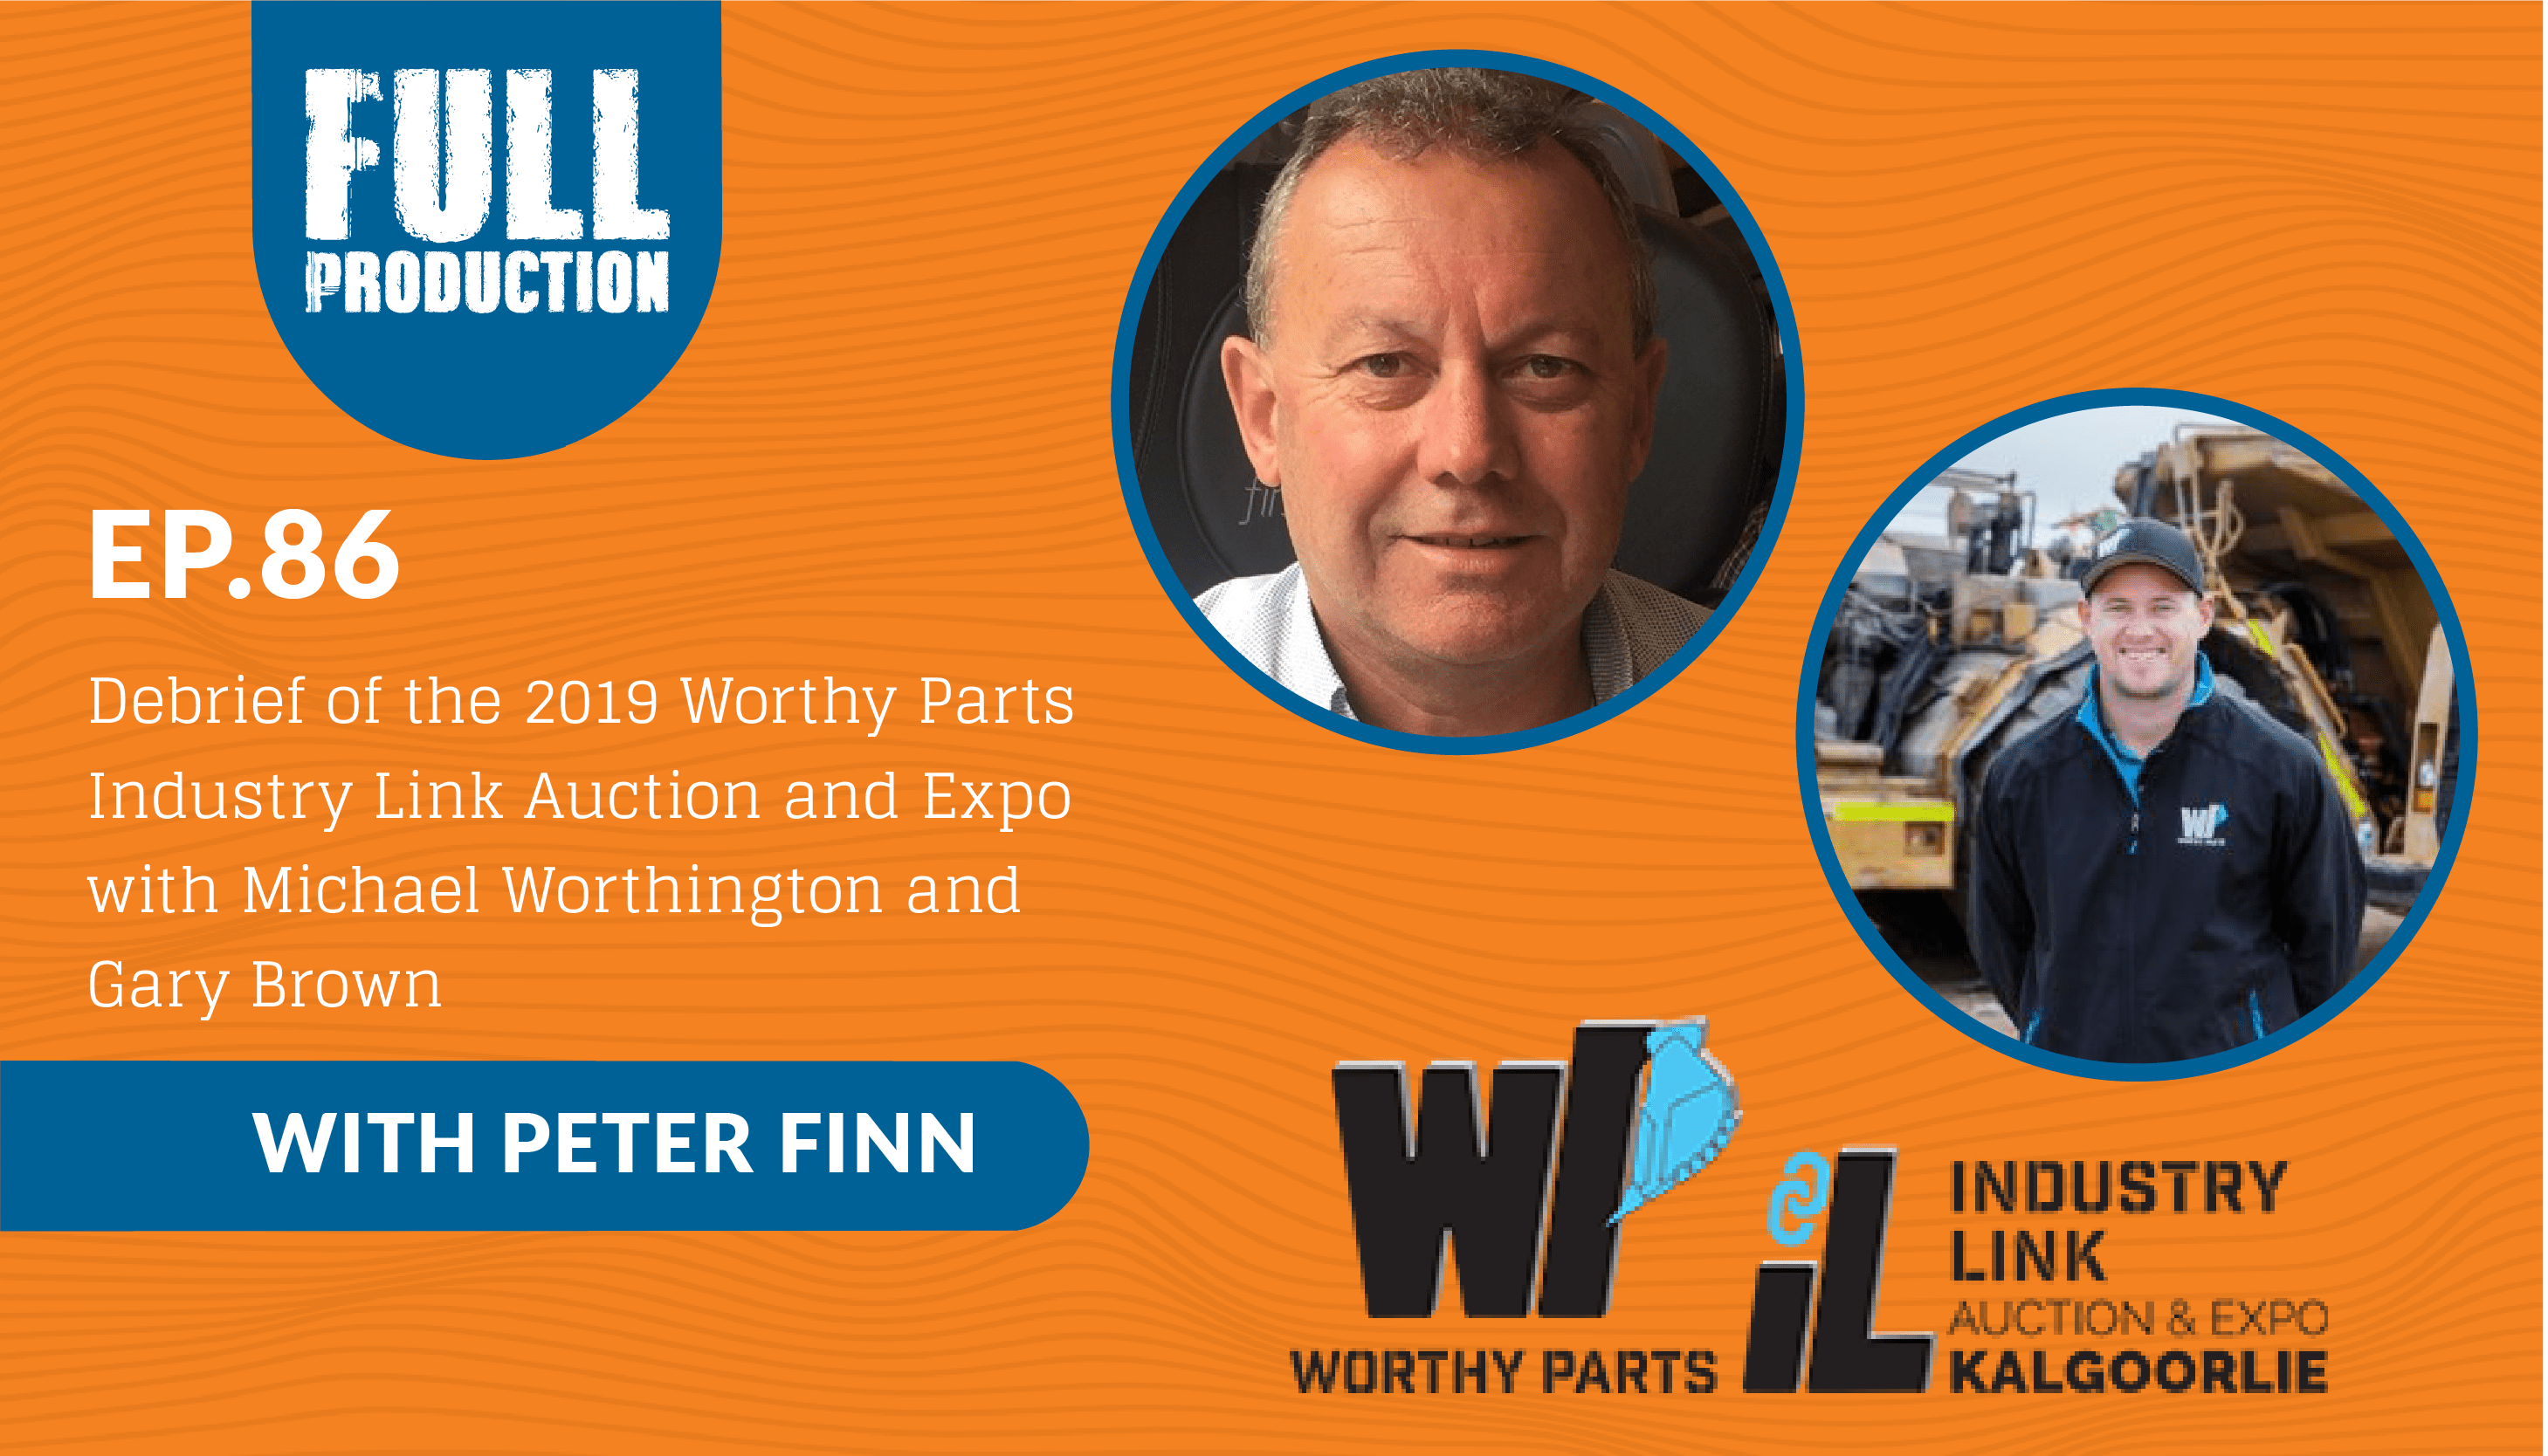 You are currently viewing EP.86 Debrief of the 2019 Worthy Parts Industry Link Auction and Expo with Michael Worthington and Gary Brown